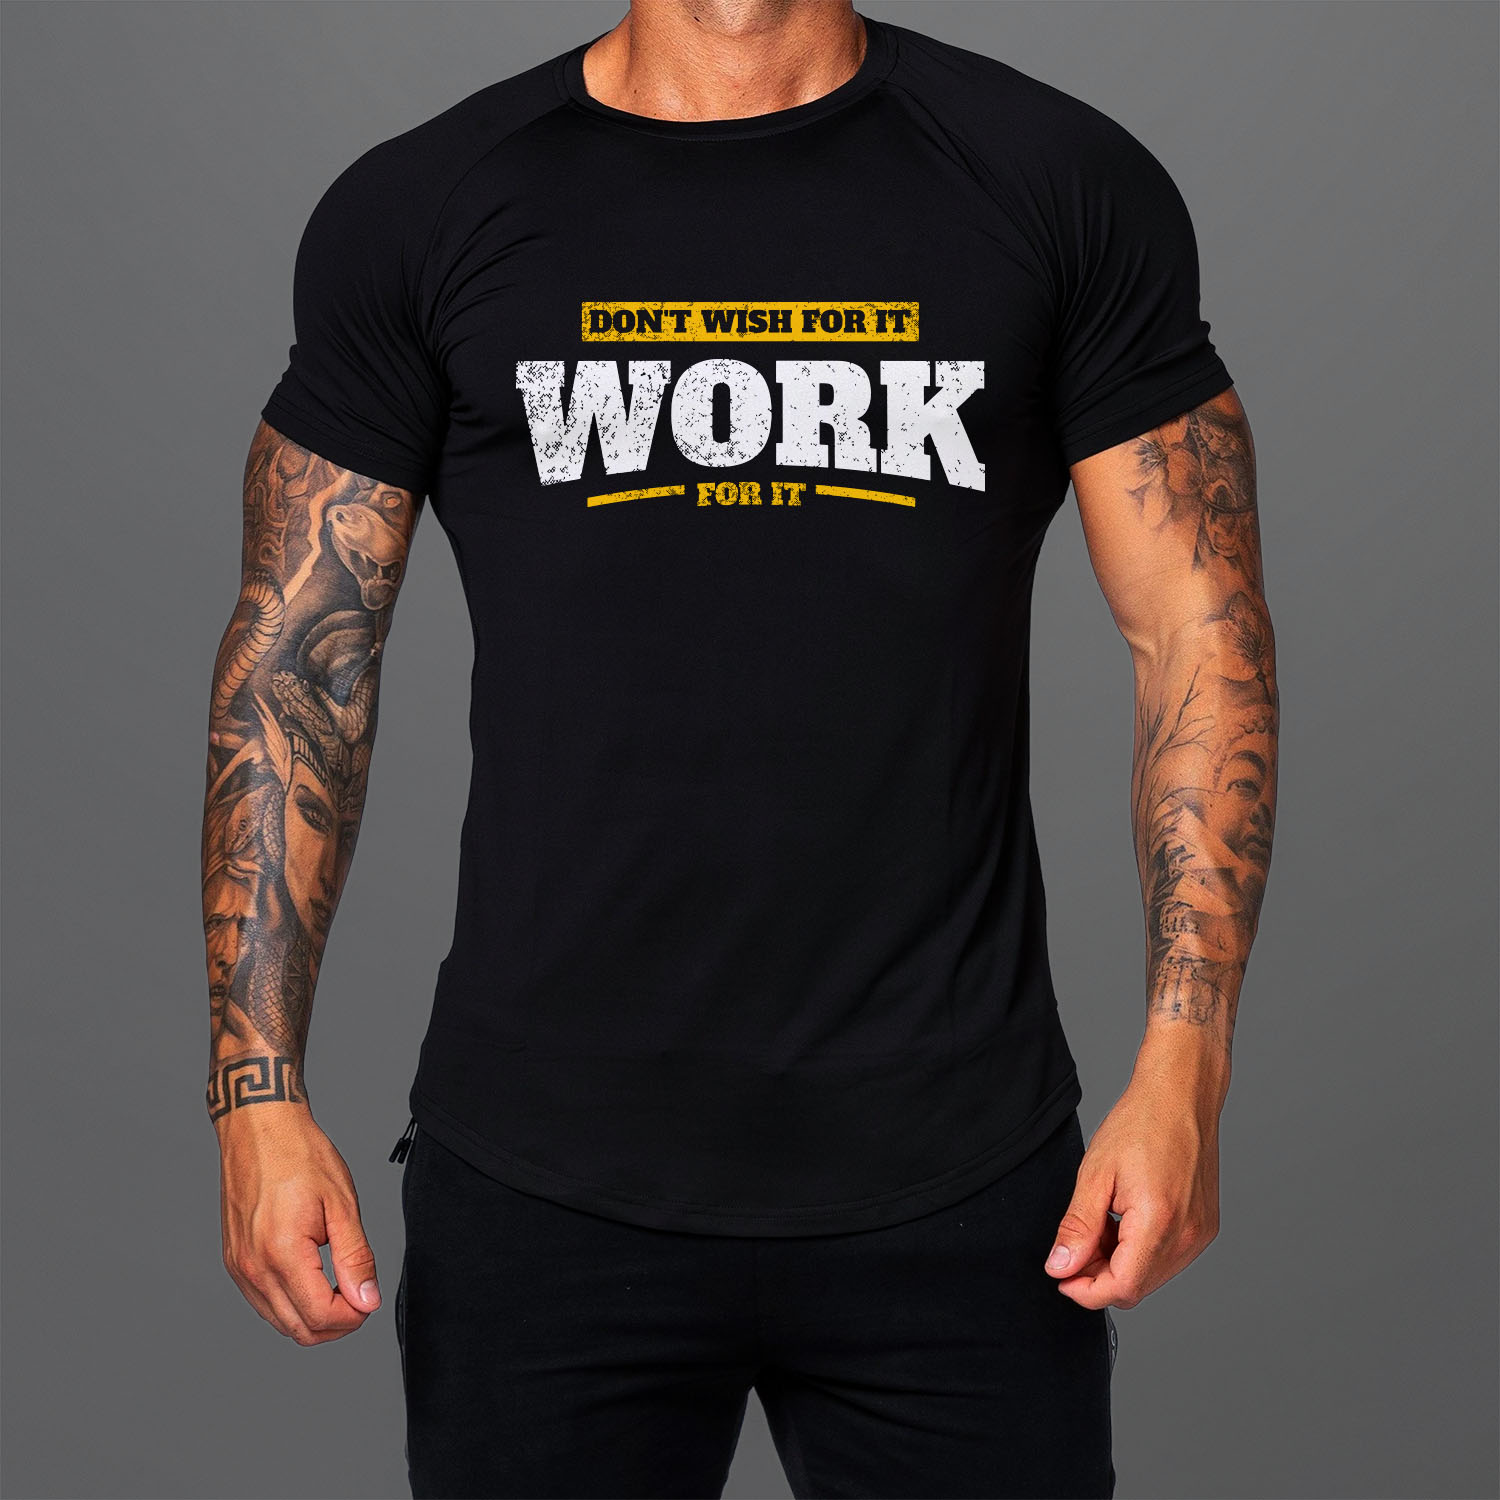 motivated-gyuros-polo-work-for-it-337